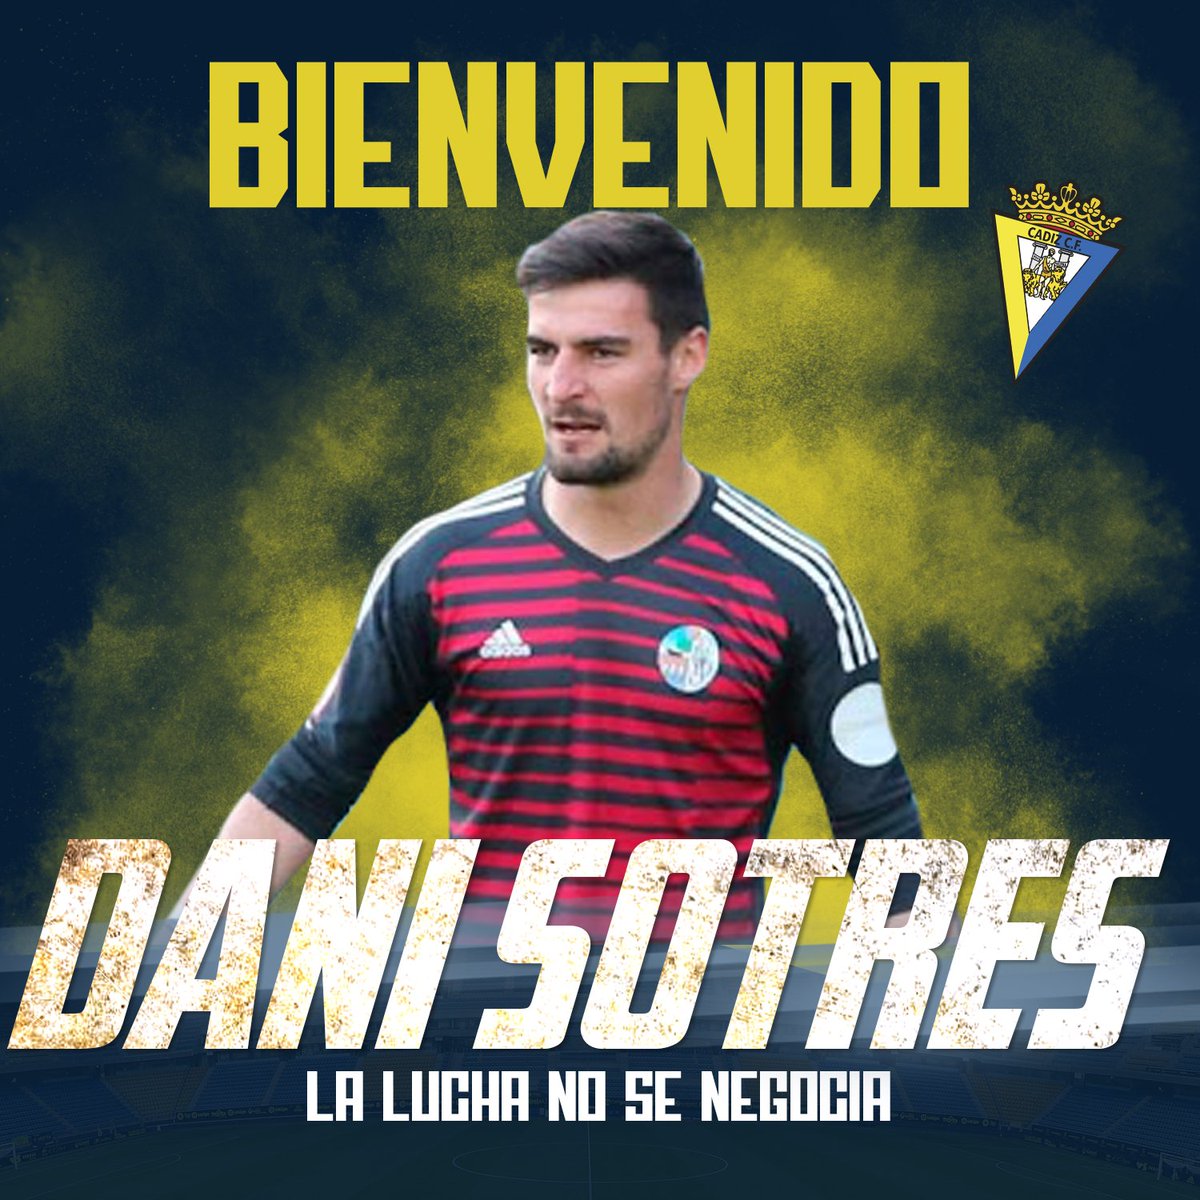  DONE DEAL  - July 24DANI SOTRES(Free agent to Cádiz )Age: 27Country: Spain  Position: GoalkeeperFee: FreeContract: Until 2023  #LLL